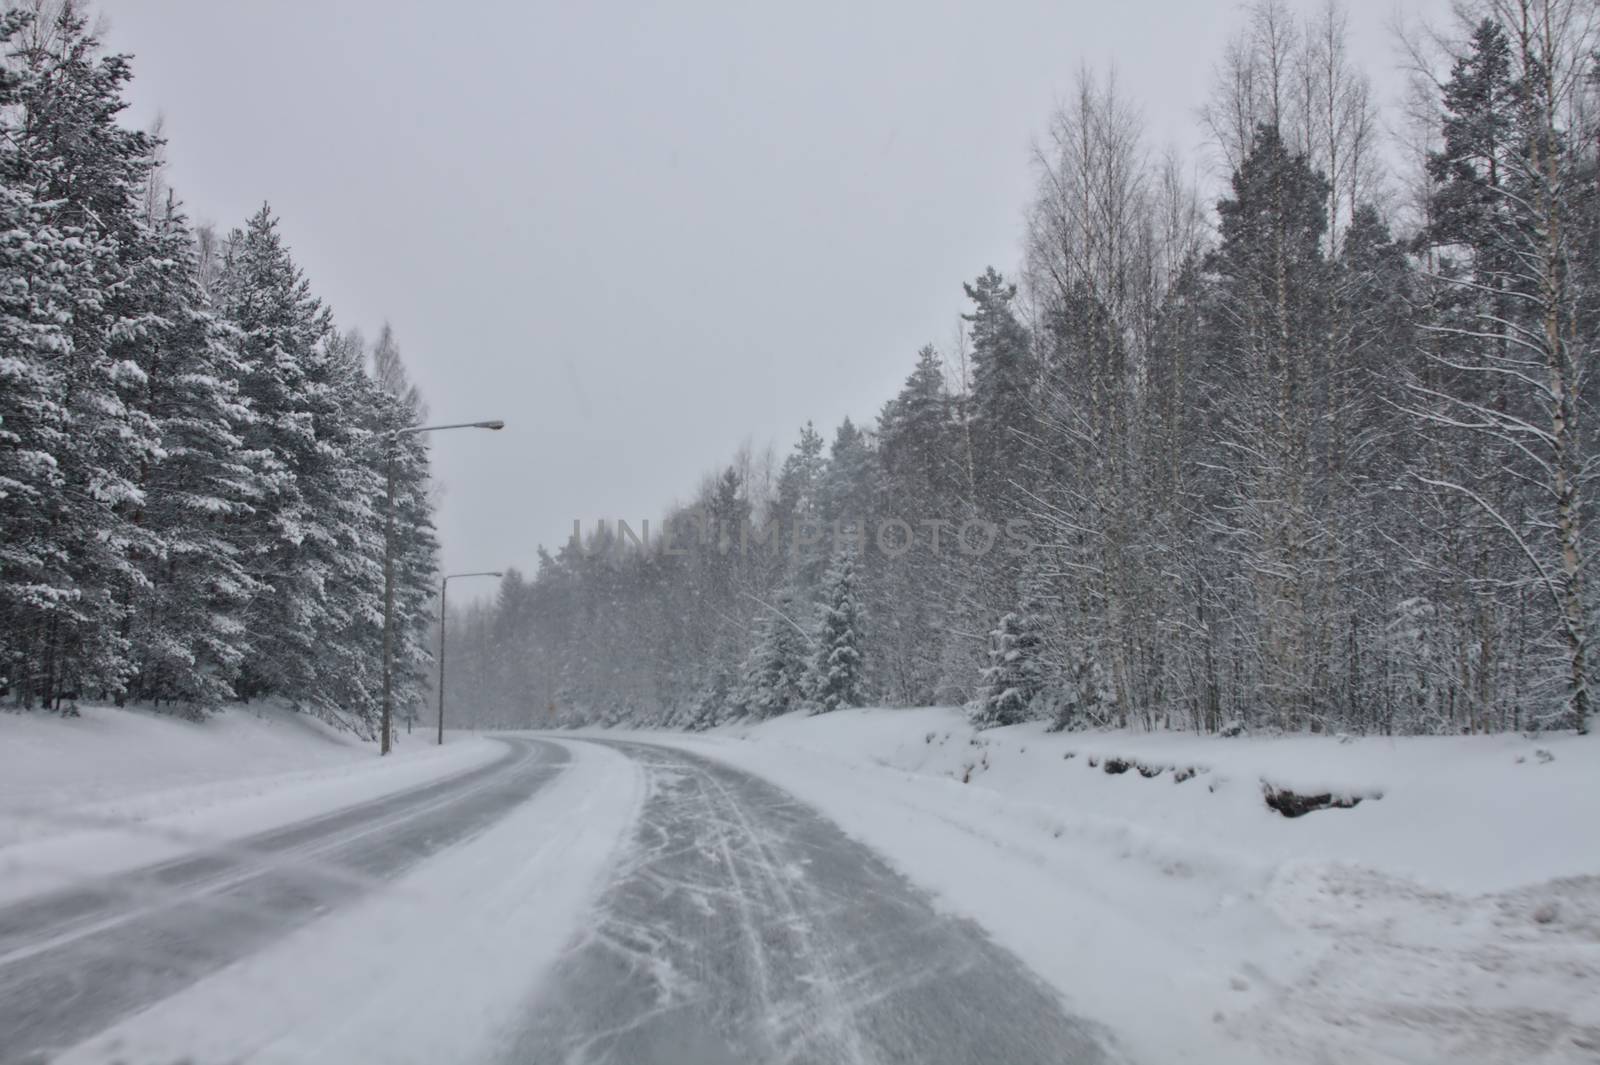 Iced and dangerous roads in the north in wintertime. Snow covering the forest and the road